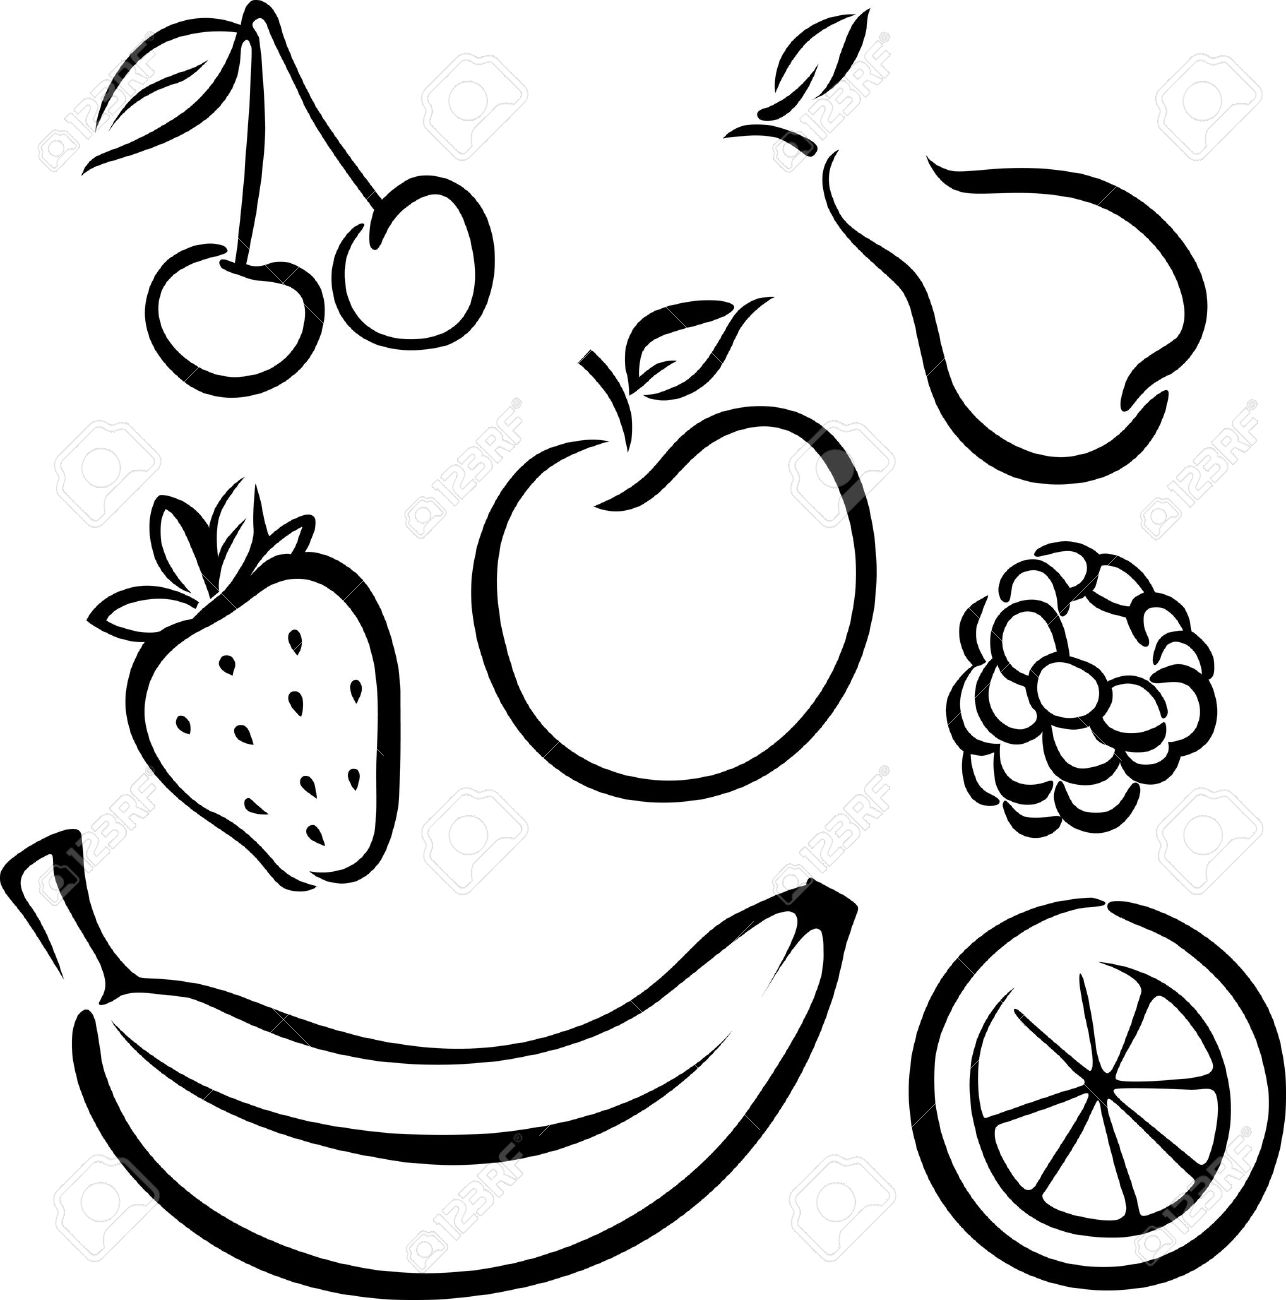 Fruit  black and white set of fruits clipart black and white clipartfest